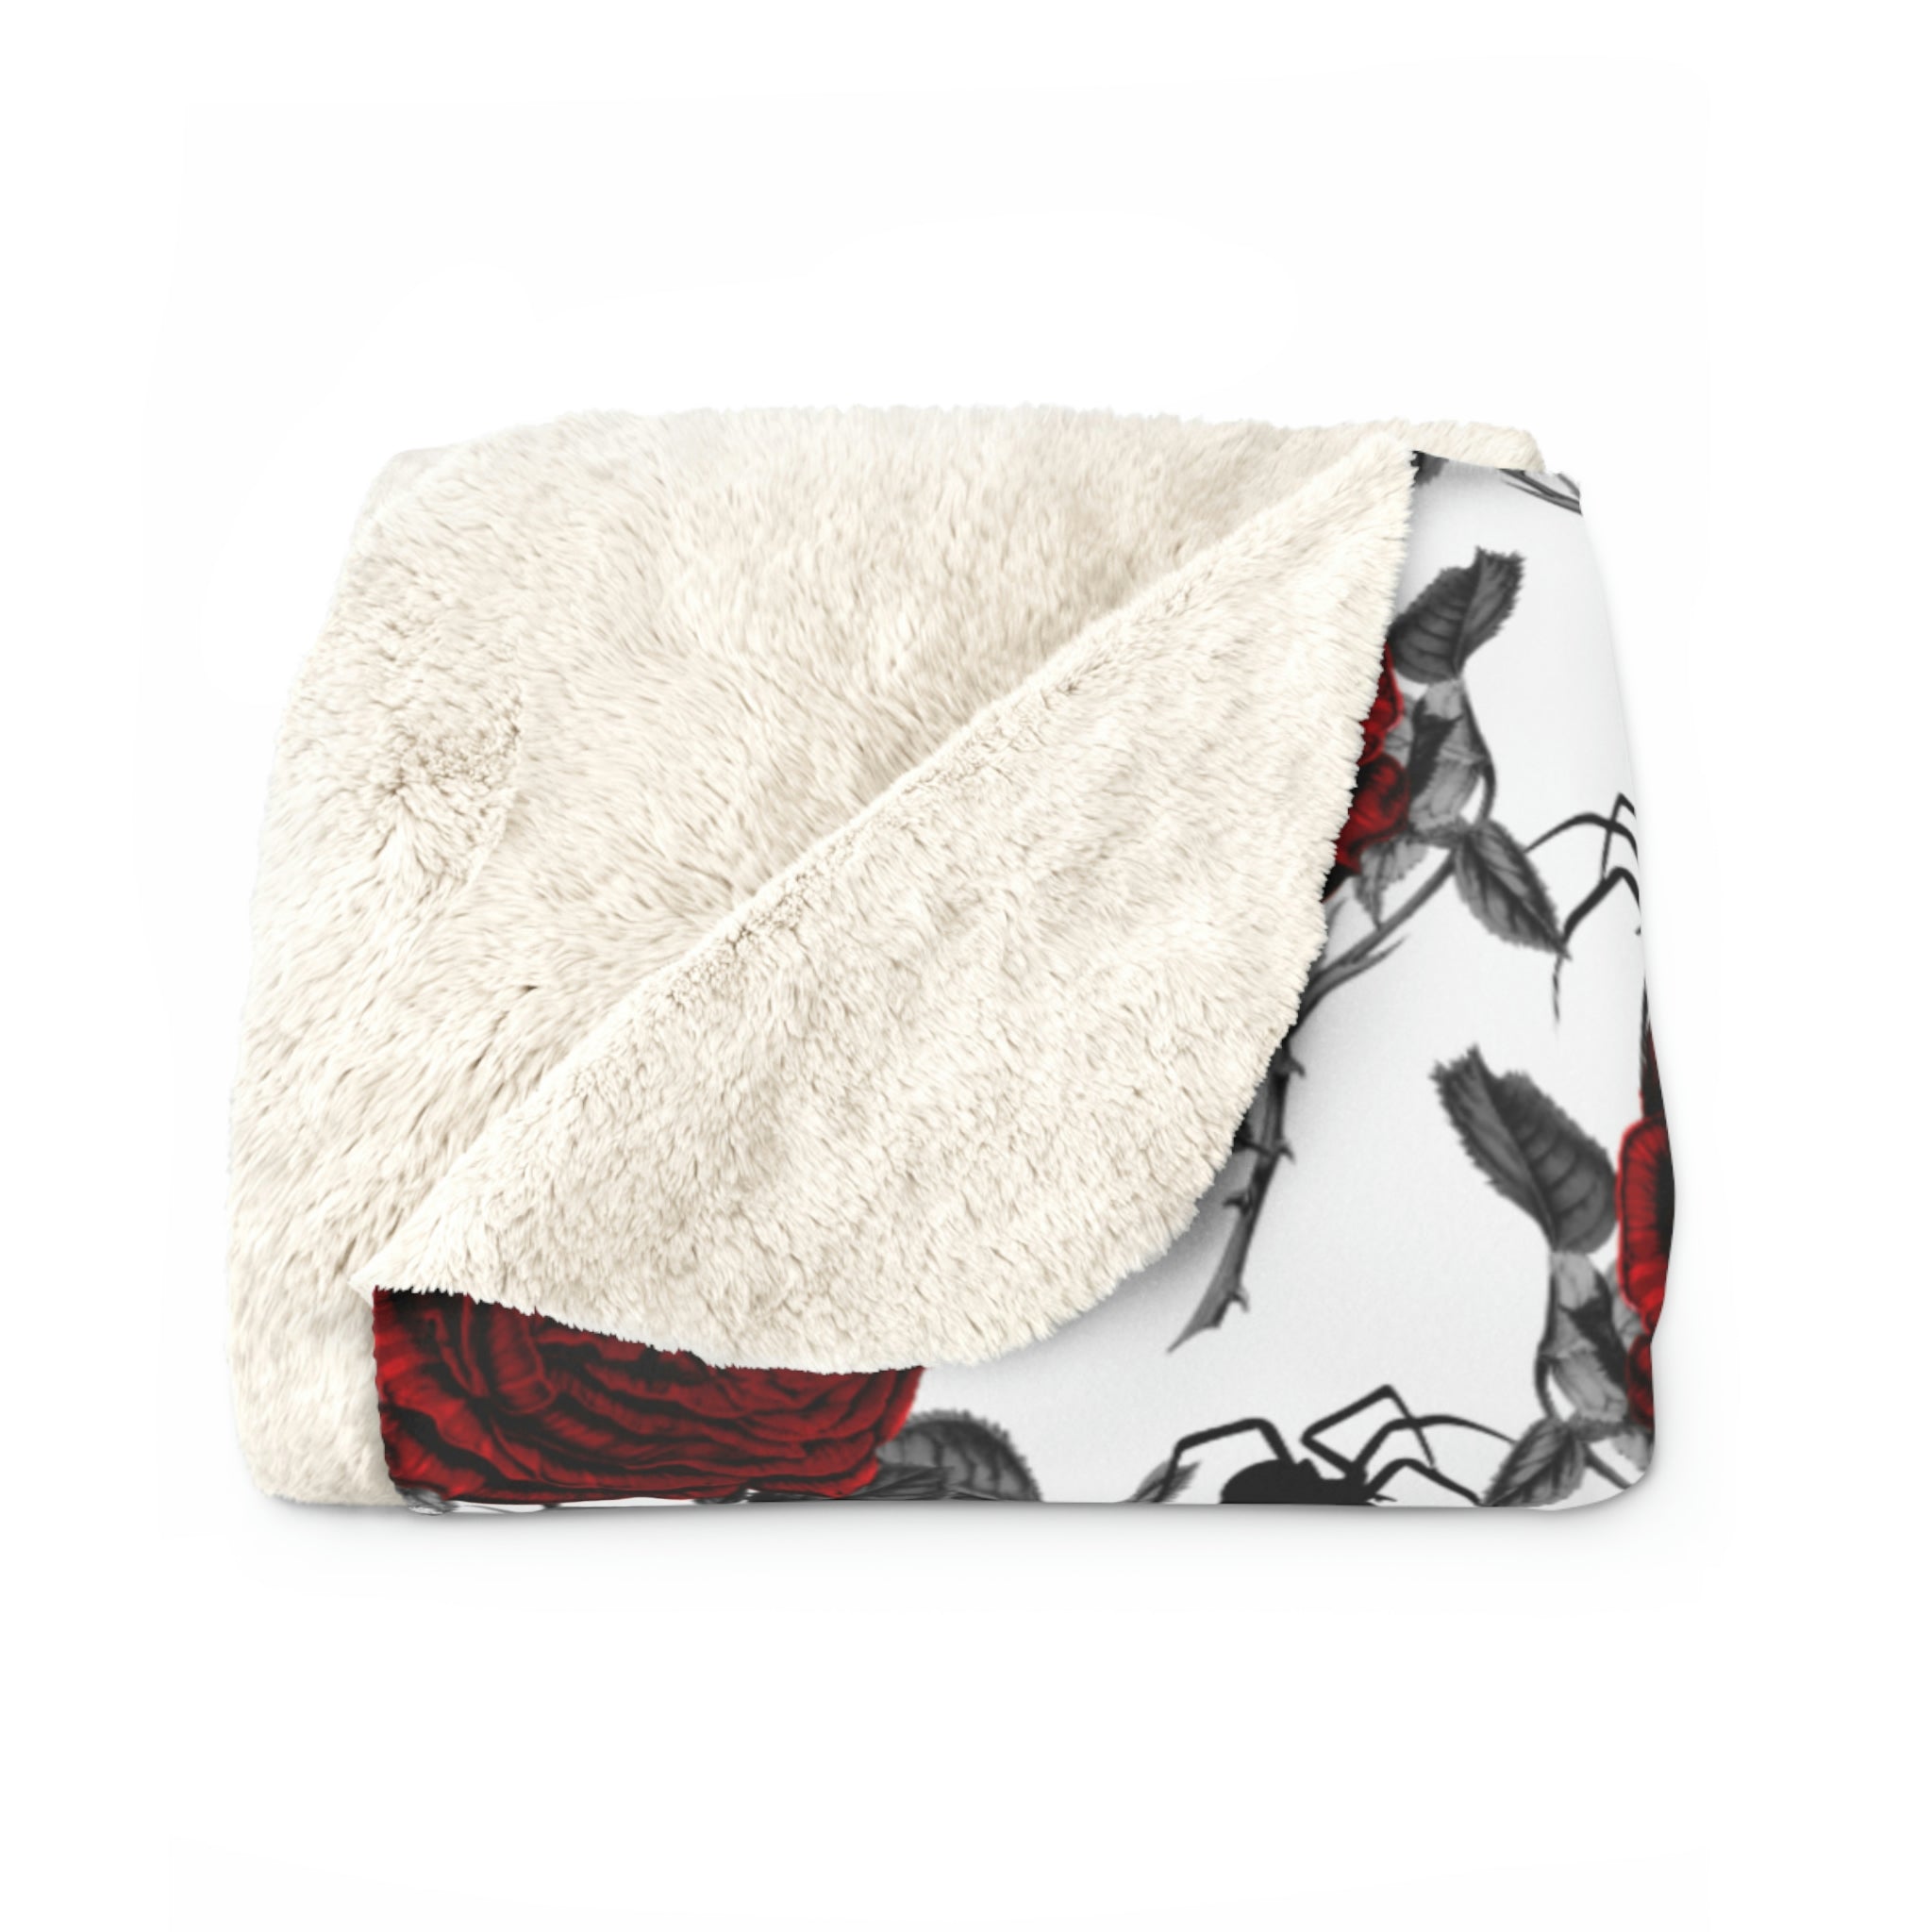 Red Rose Spider Throw Blanket, Minky or Sherpa 50" x 60" - Durazza